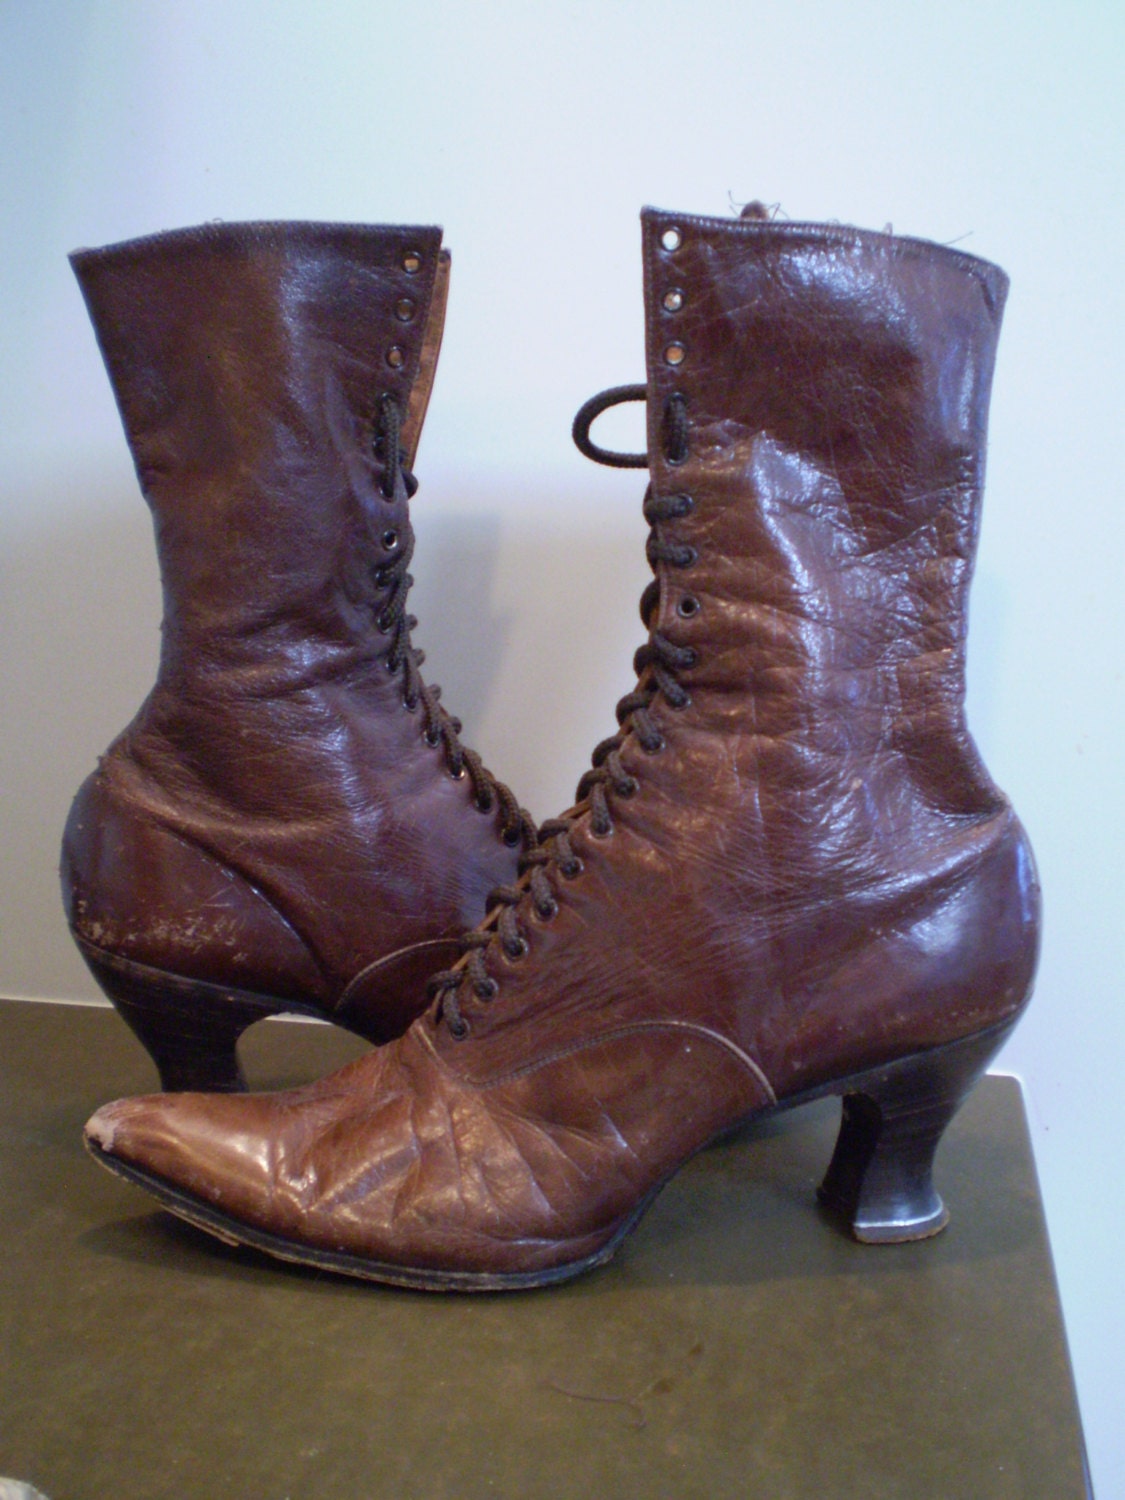 Vintage 1890s early 1900s Lace Up Womens Boots in Walnut